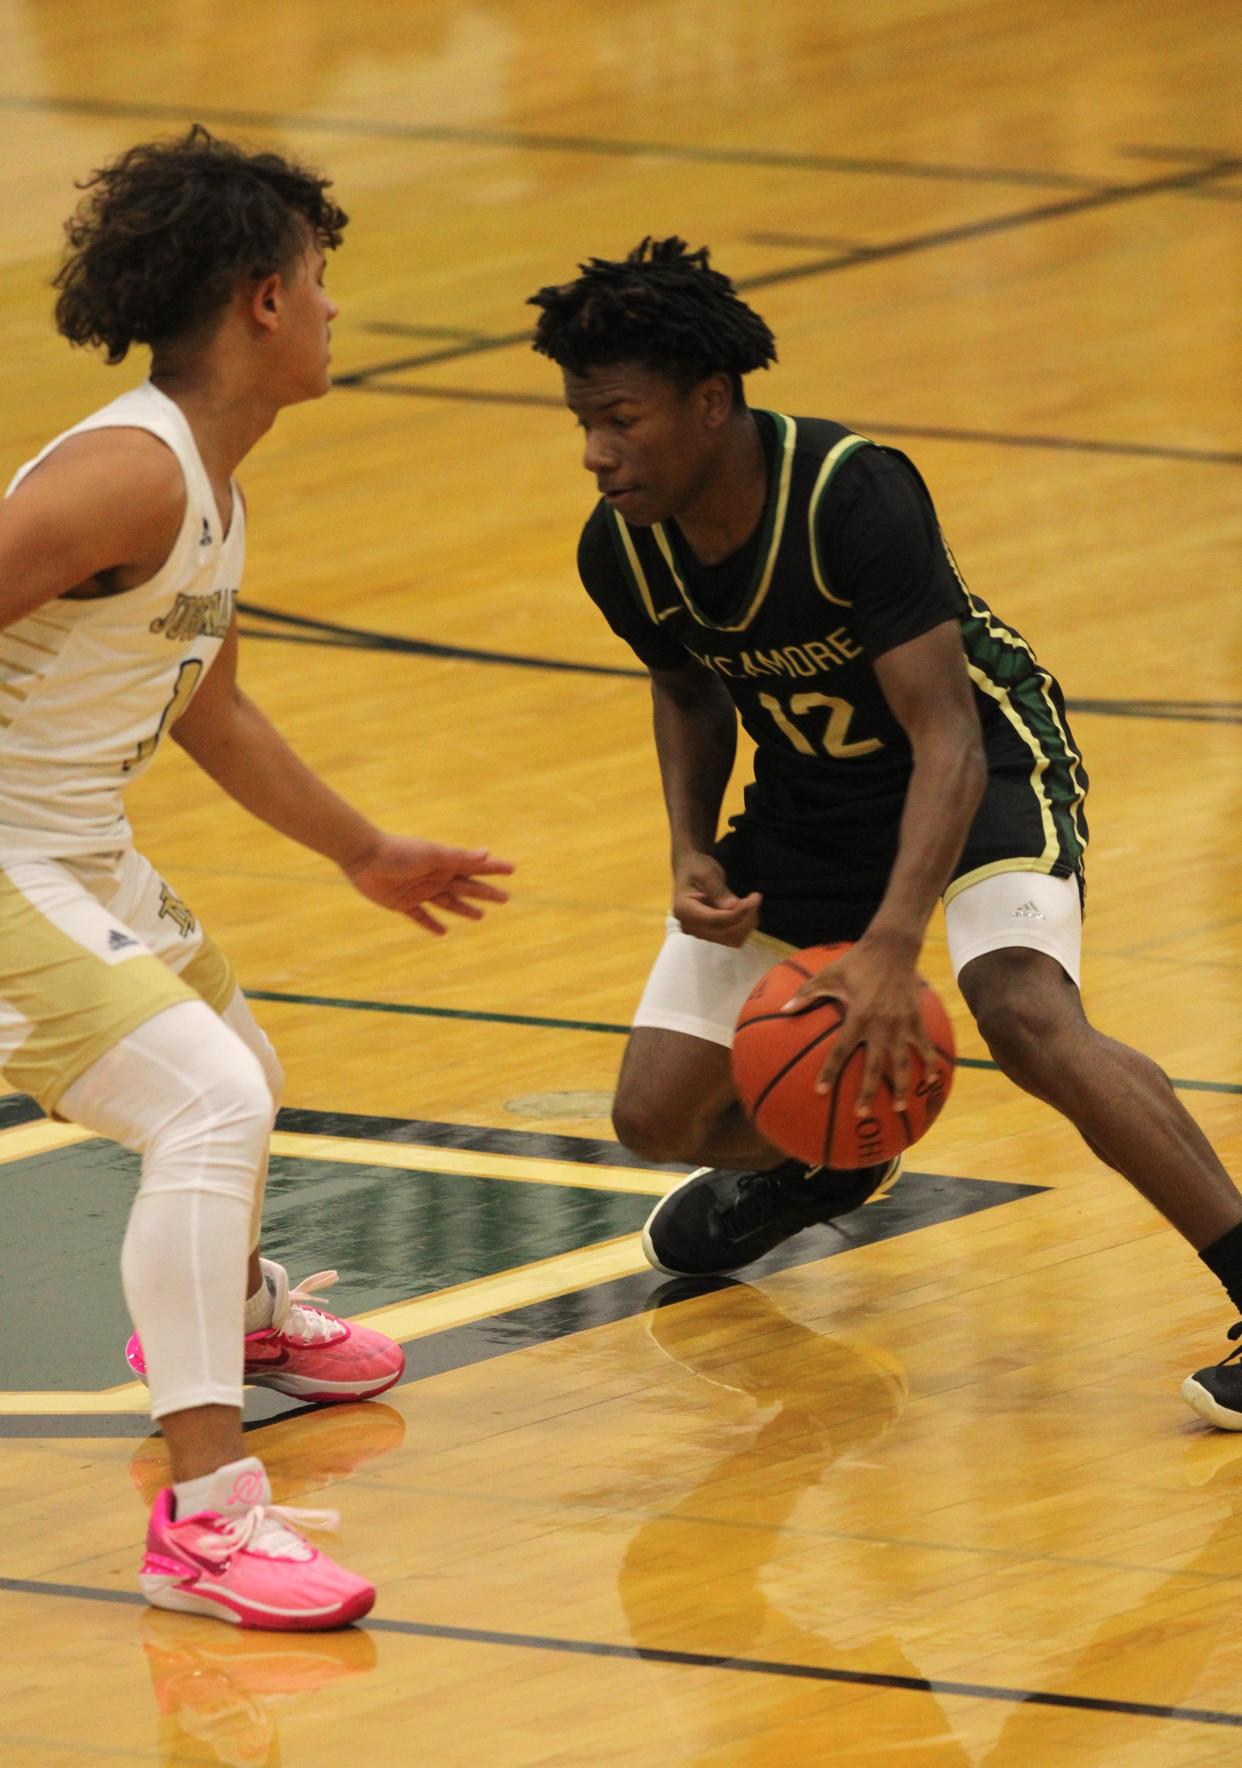 Sycamore junior Tariq Kimbrough is second on the team in scoring at 9.4 points per game.